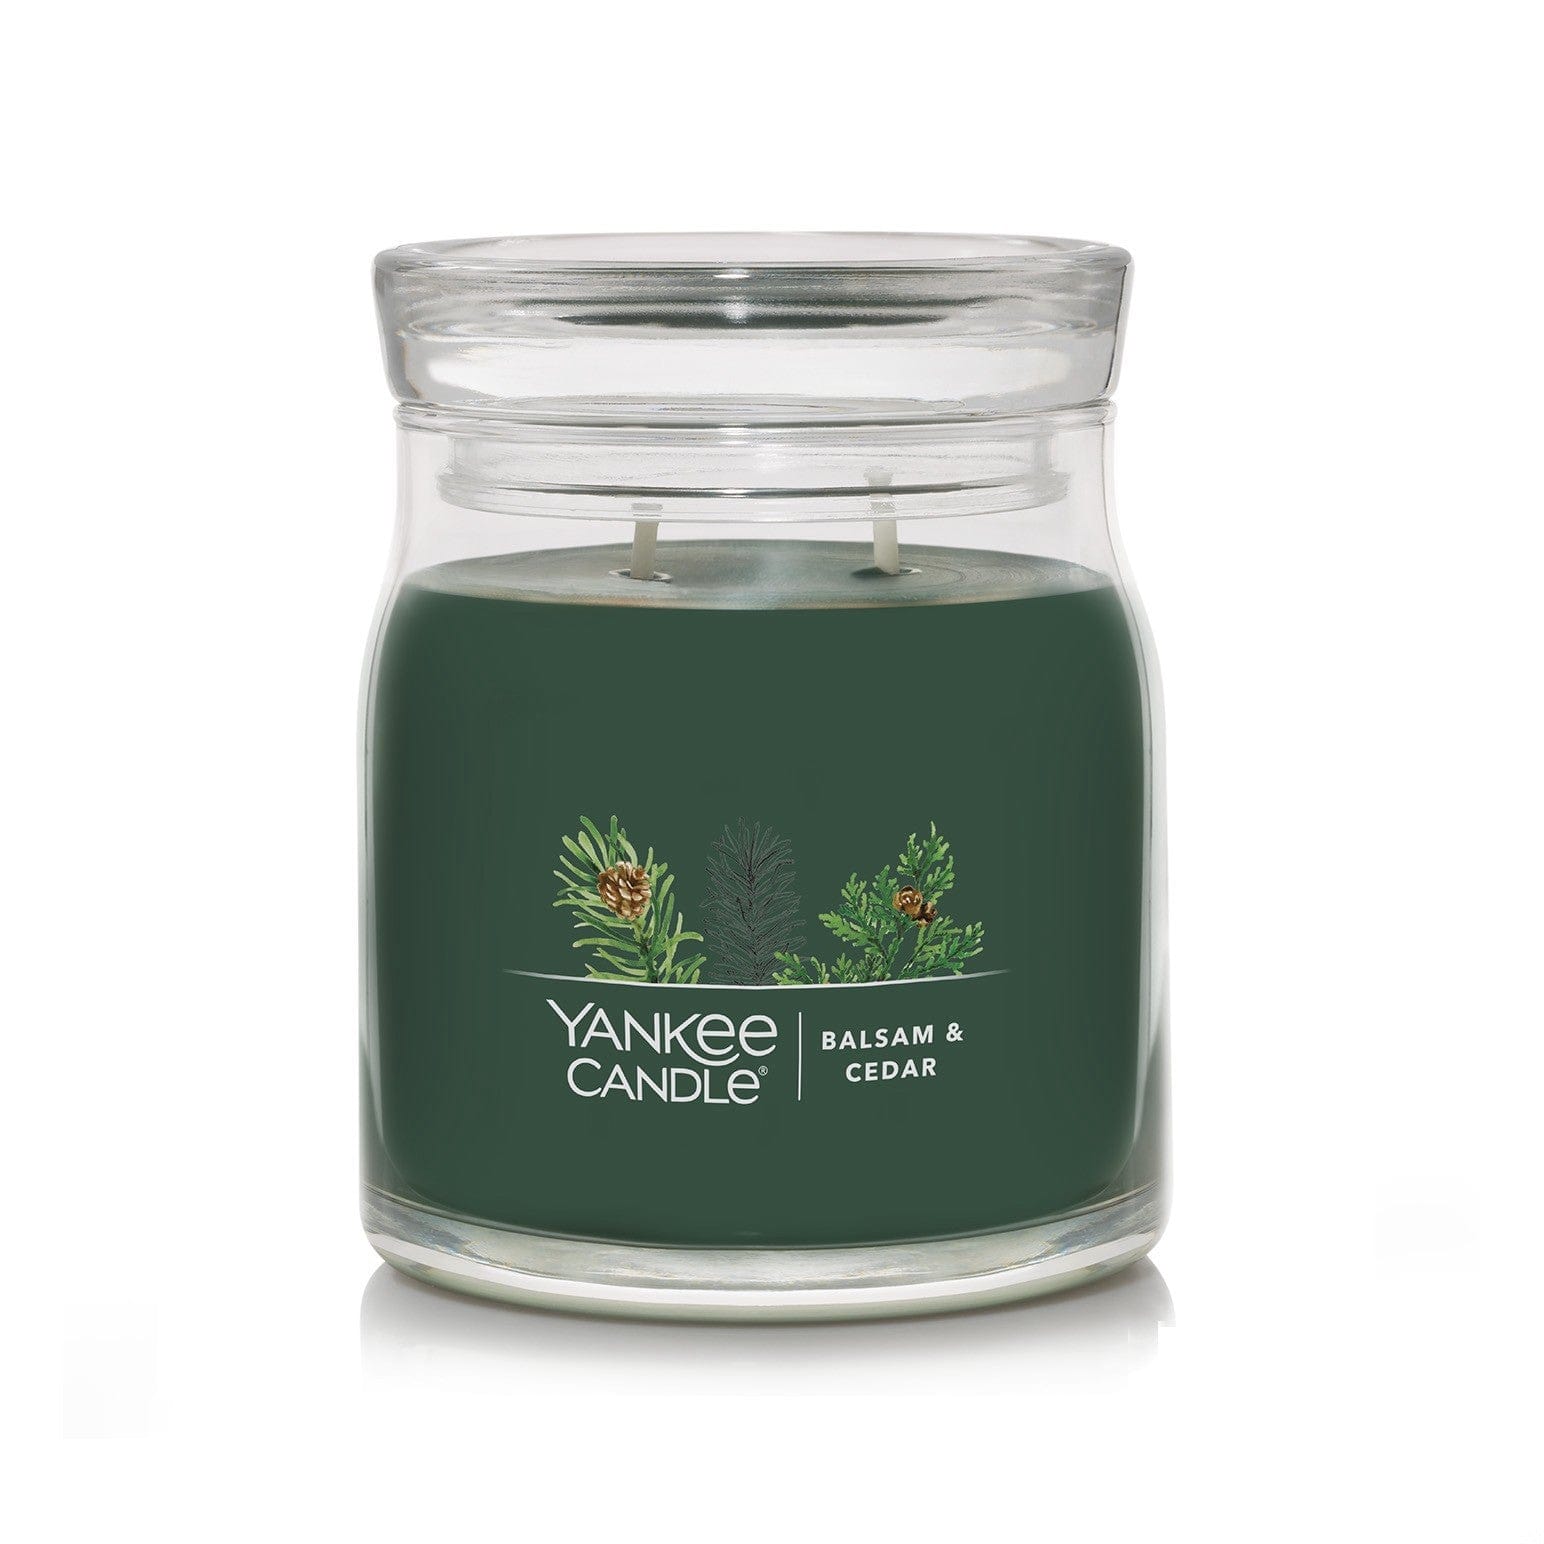 Yankee Candle Accessories One Size / Balsam Cedar Yankee Candle - Signature Medium 2 Wick 13oz Candle